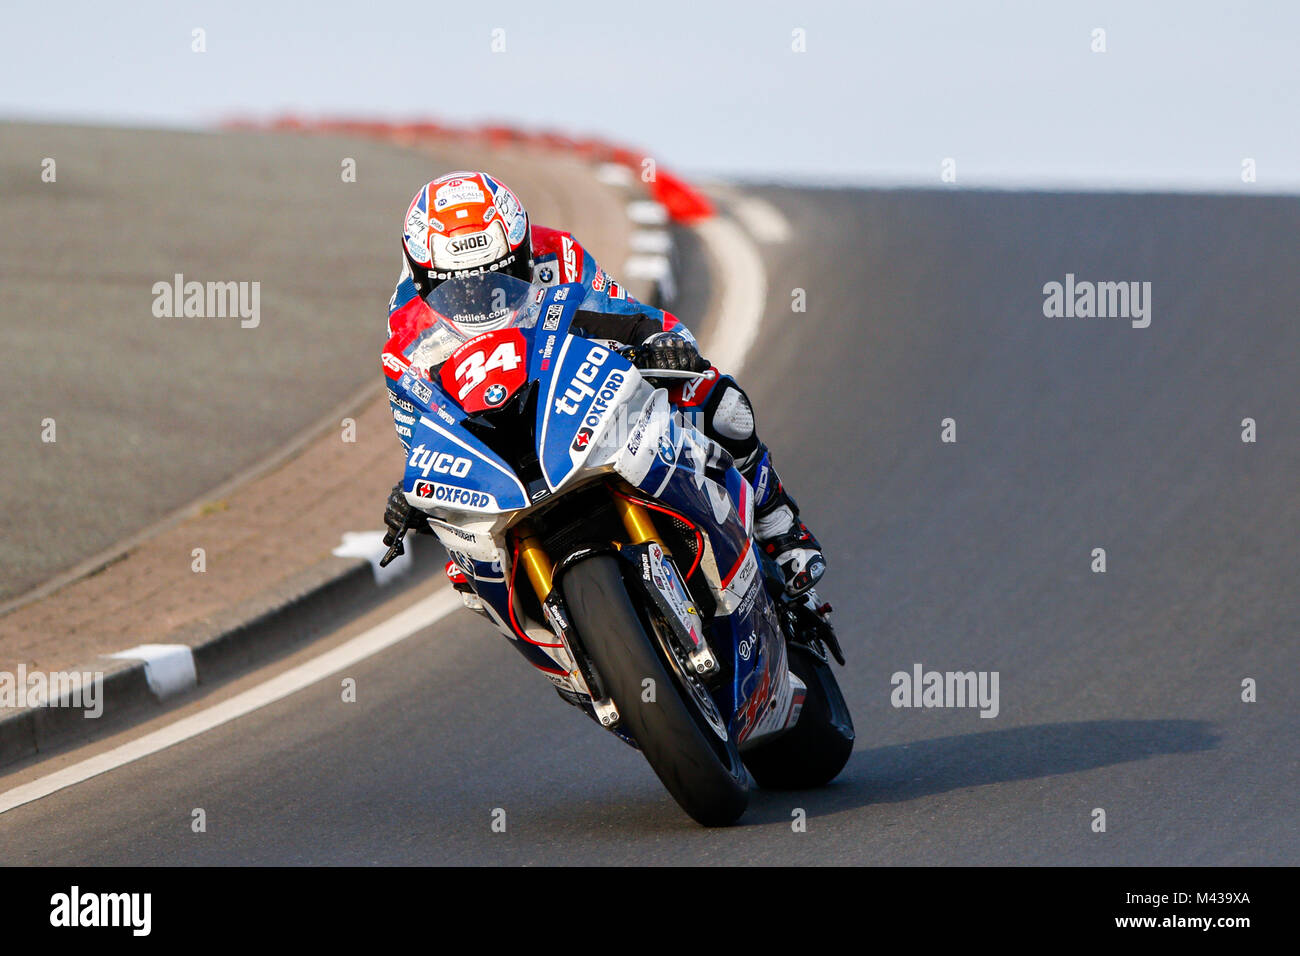 FILE PICS: 14th Feb, 2018. Photo taken:  Carrickfergus, Northern Ireland. Thursday 11 May, 2017.   Alastair Seeley, the most successful rider in the history of the Vauxhall International North West 200 with 21 victories, will race Tyco BMWs in the Superbike and Superstock races at this year's event on May 13-19.  This will be the 38 year old's seventh season racing under the banner of Philip and Hector Neill's TAS Racing team and Seeley has his sights firmly set on superbike glory.   Credit: Graham  Service/Alamy Live News Stock Photo